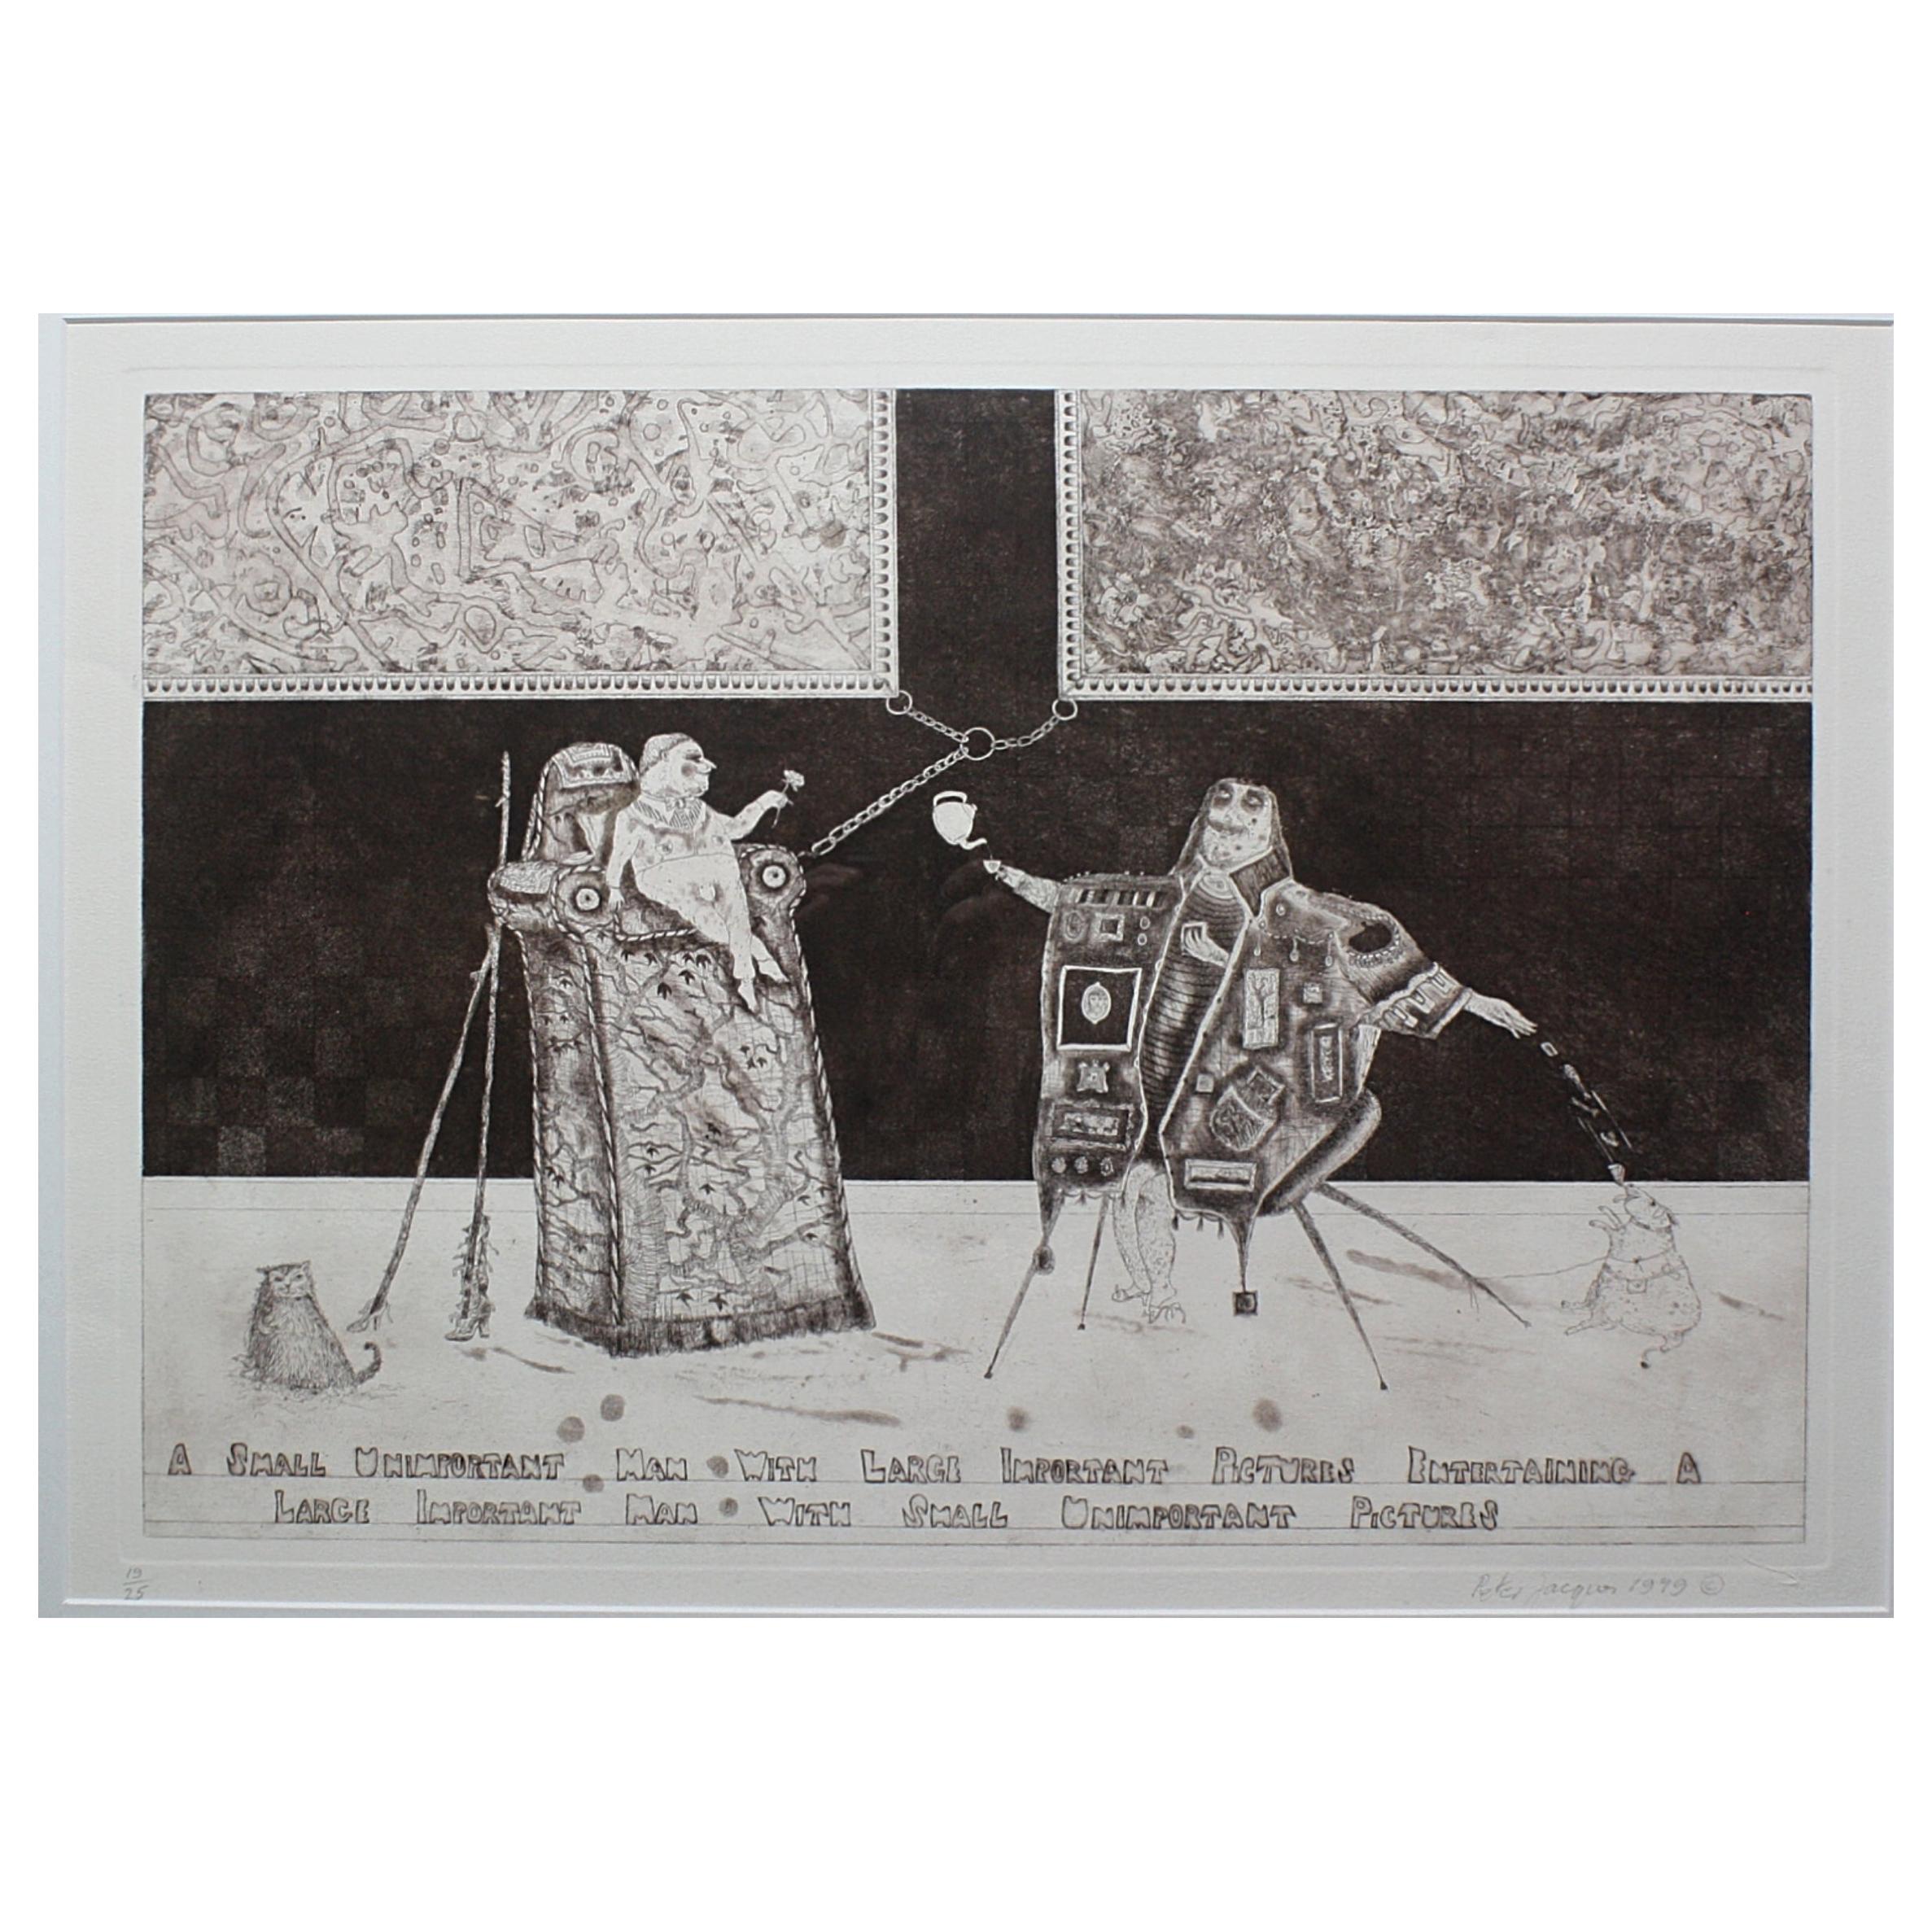 Satirical Lithograph by Peter Jacques "Unimportant Man" Artist Royal Academy For Sale